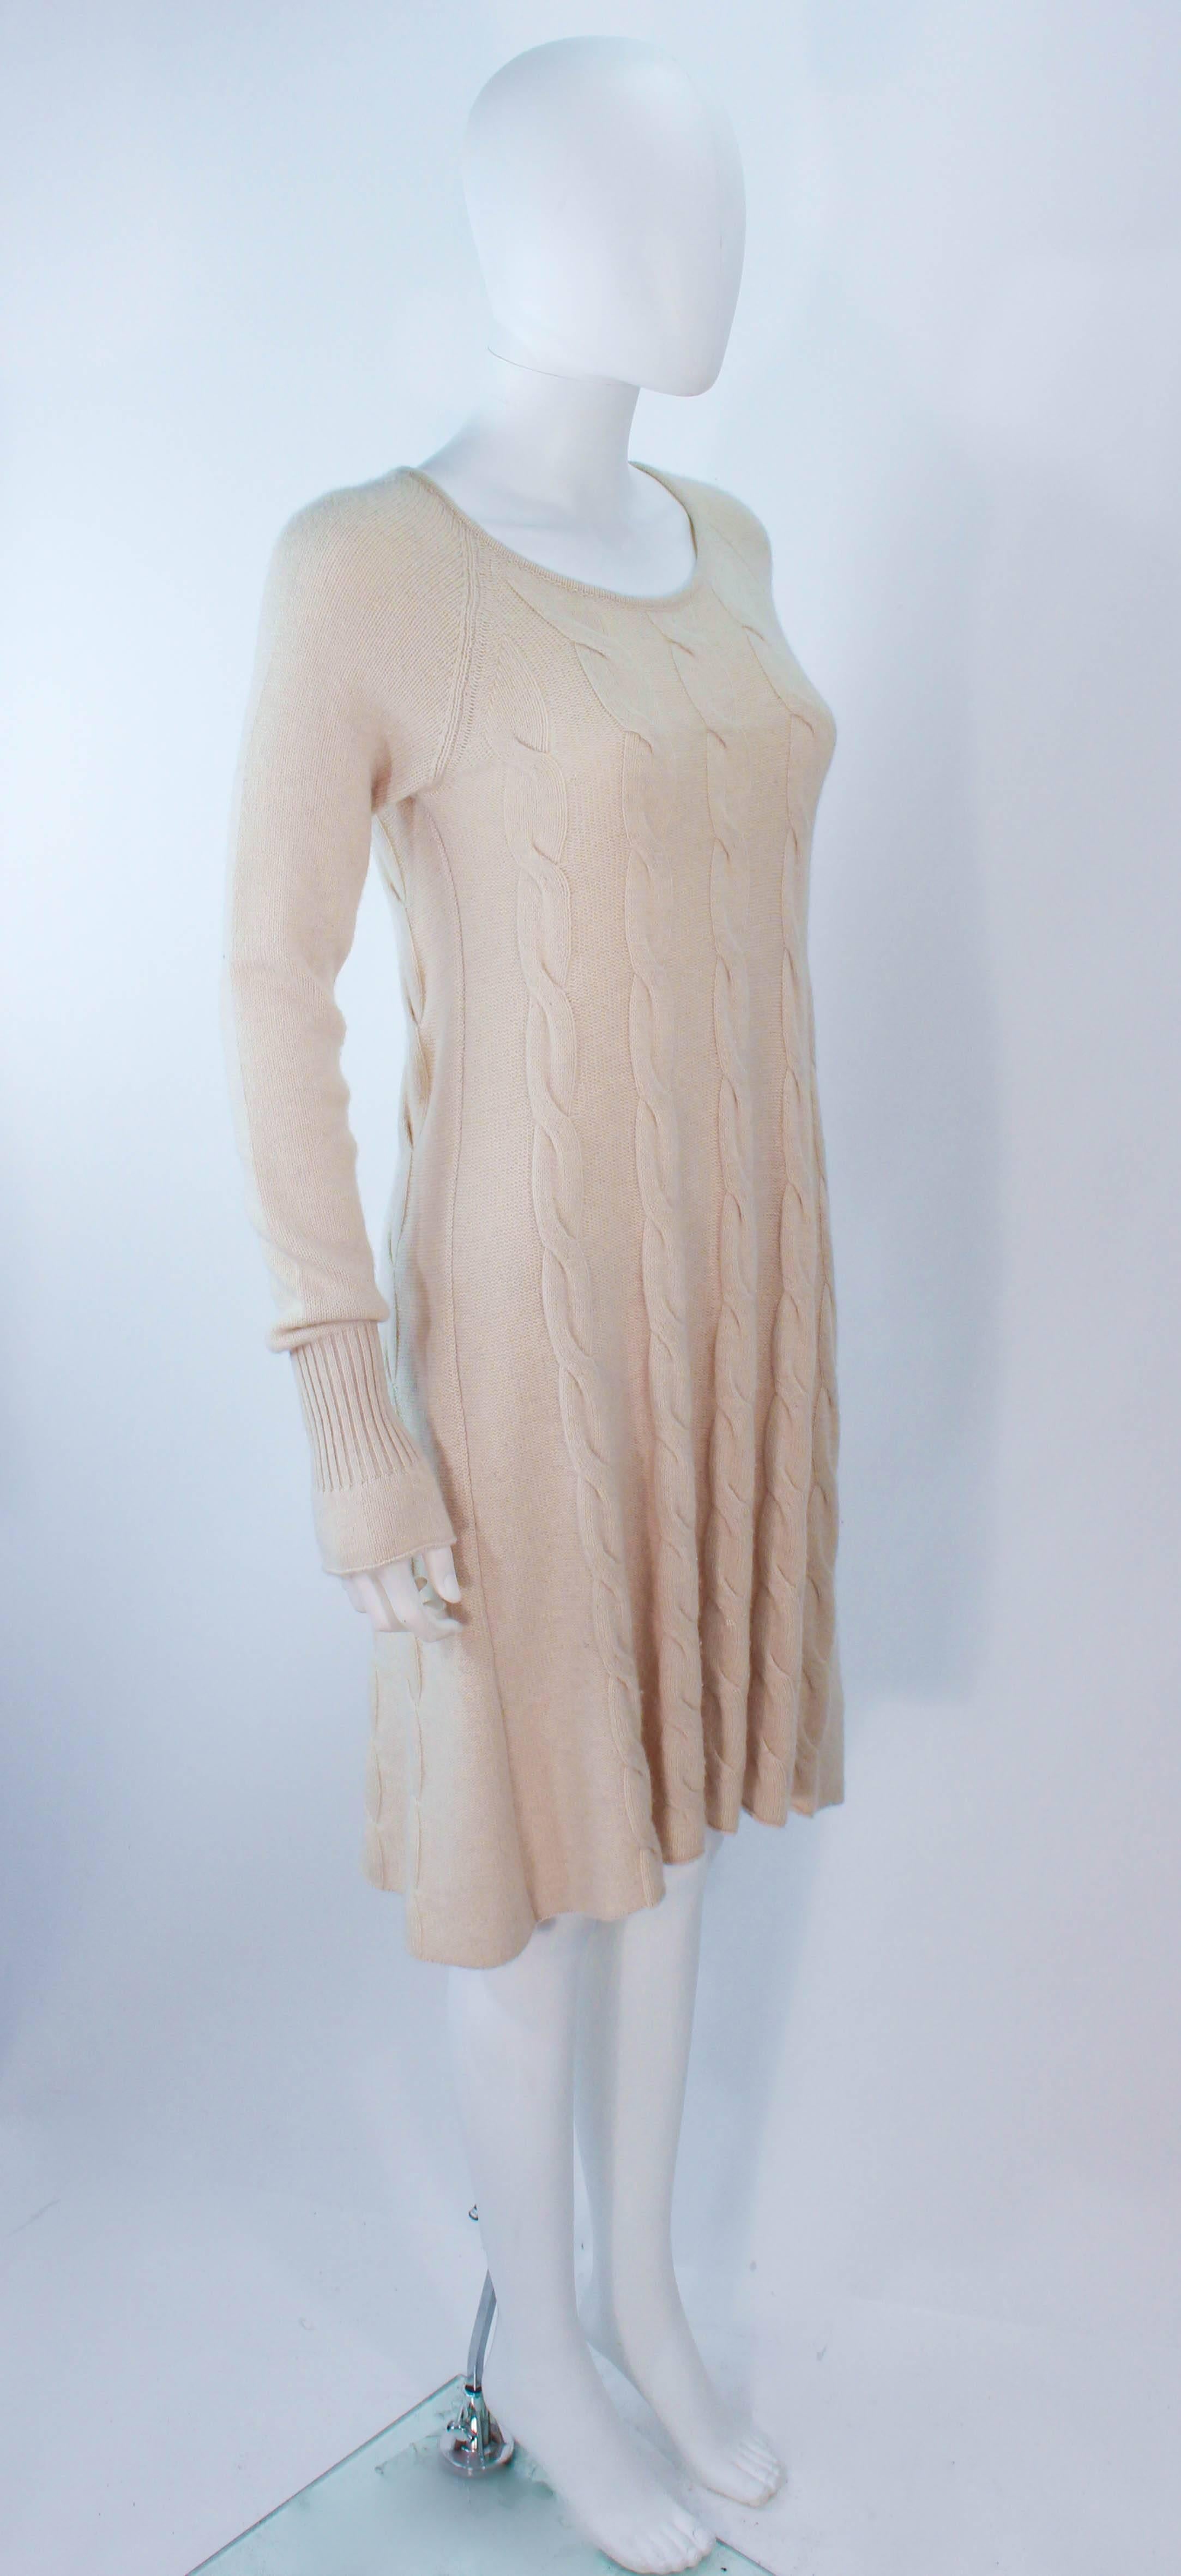 KRIZIA Cream Cashmere Knit Dress Size 42 In Excellent Condition For Sale In Los Angeles, CA